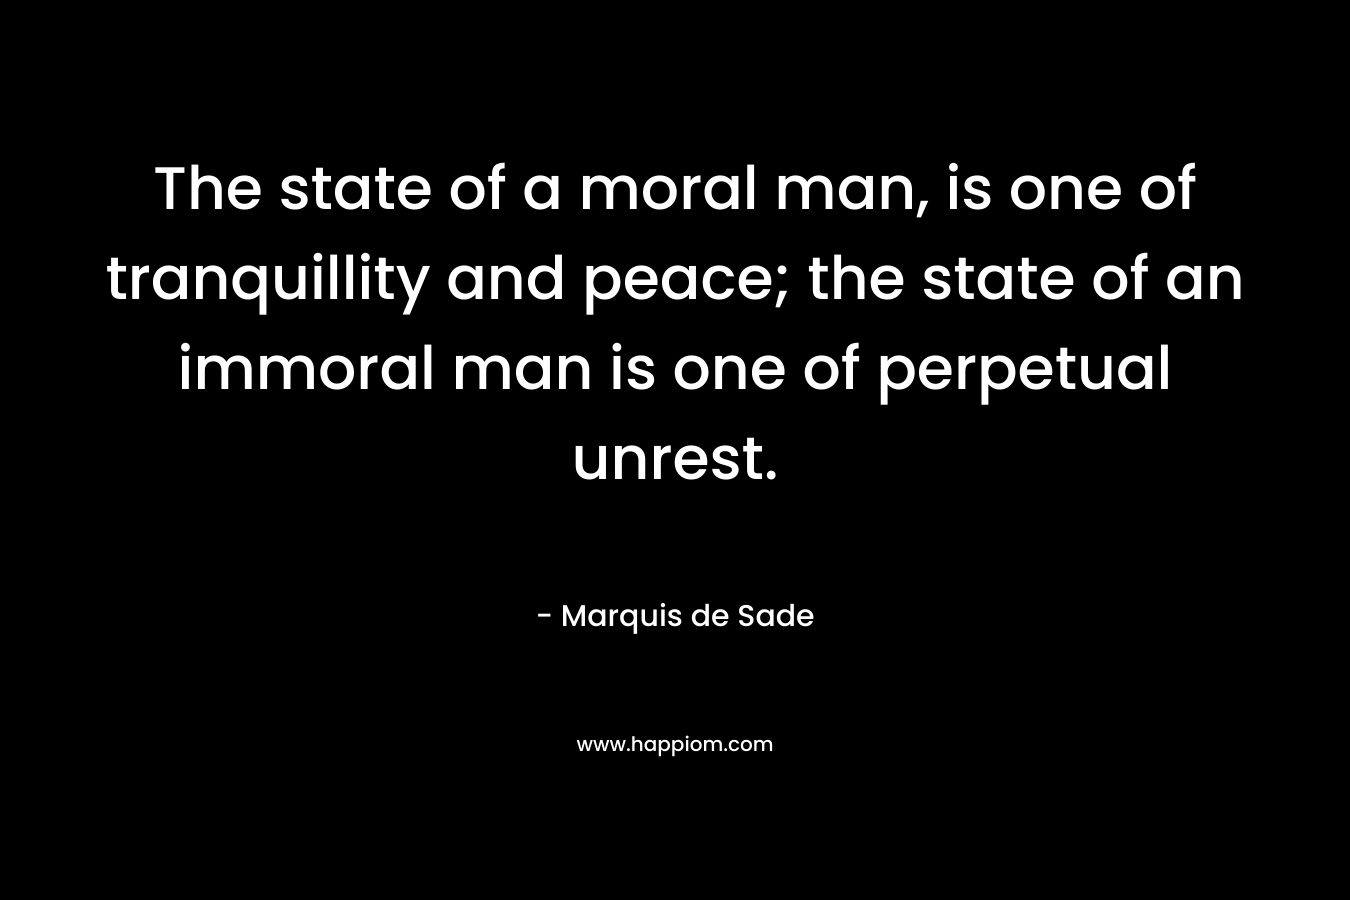 The state of a moral man, is one of tranquillity and peace; the state of an immoral man is one of perpetual unrest.